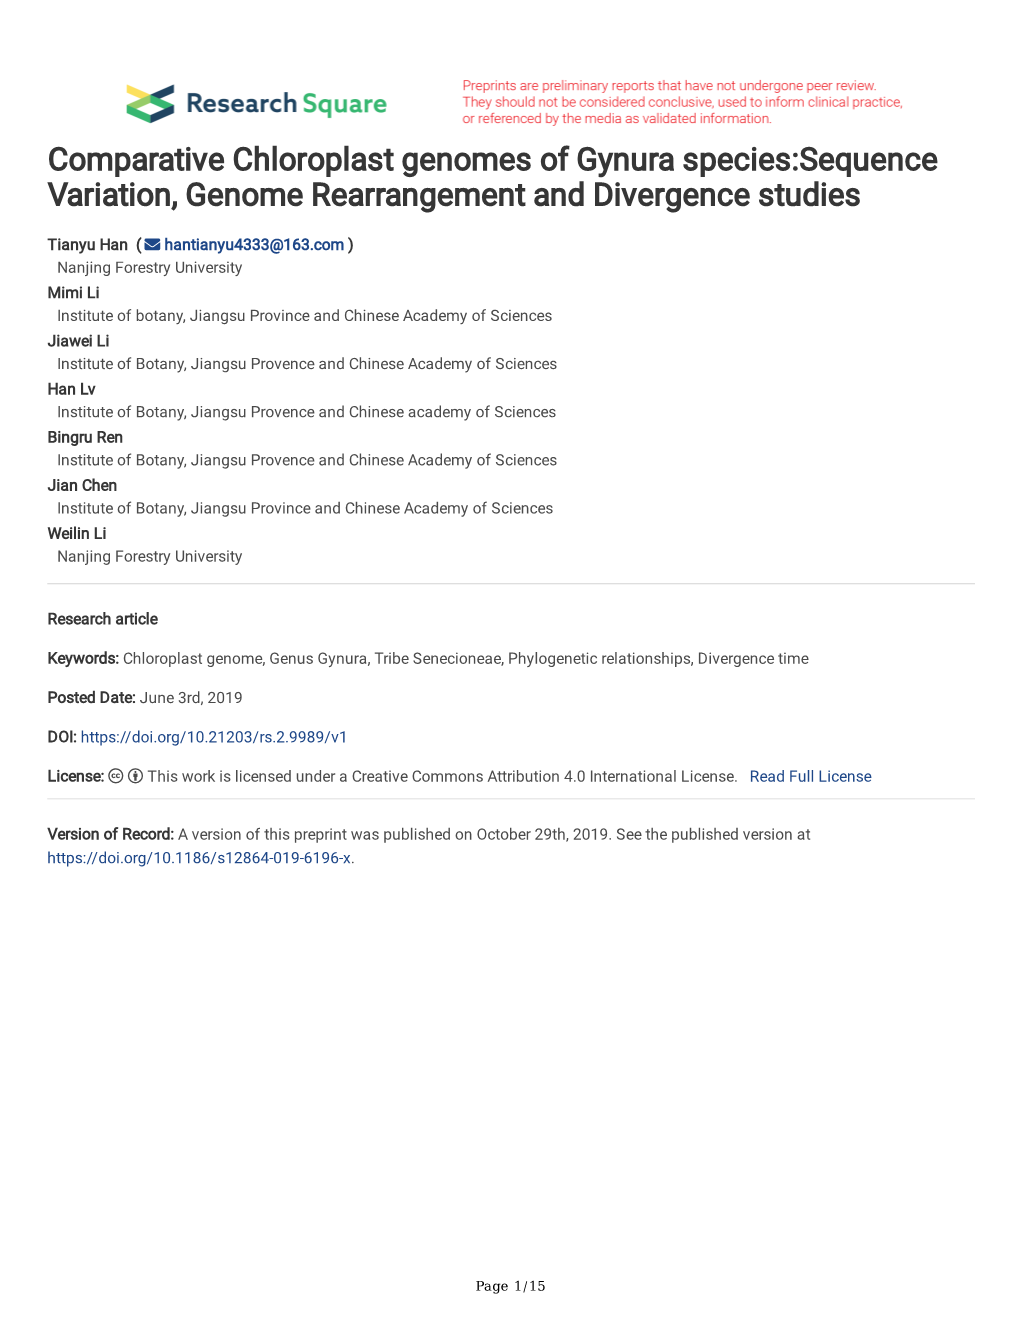 Comparative Chloroplast Genomes of Gynura Species:Sequence Variation, Genome Rearrangement and Divergence Studies